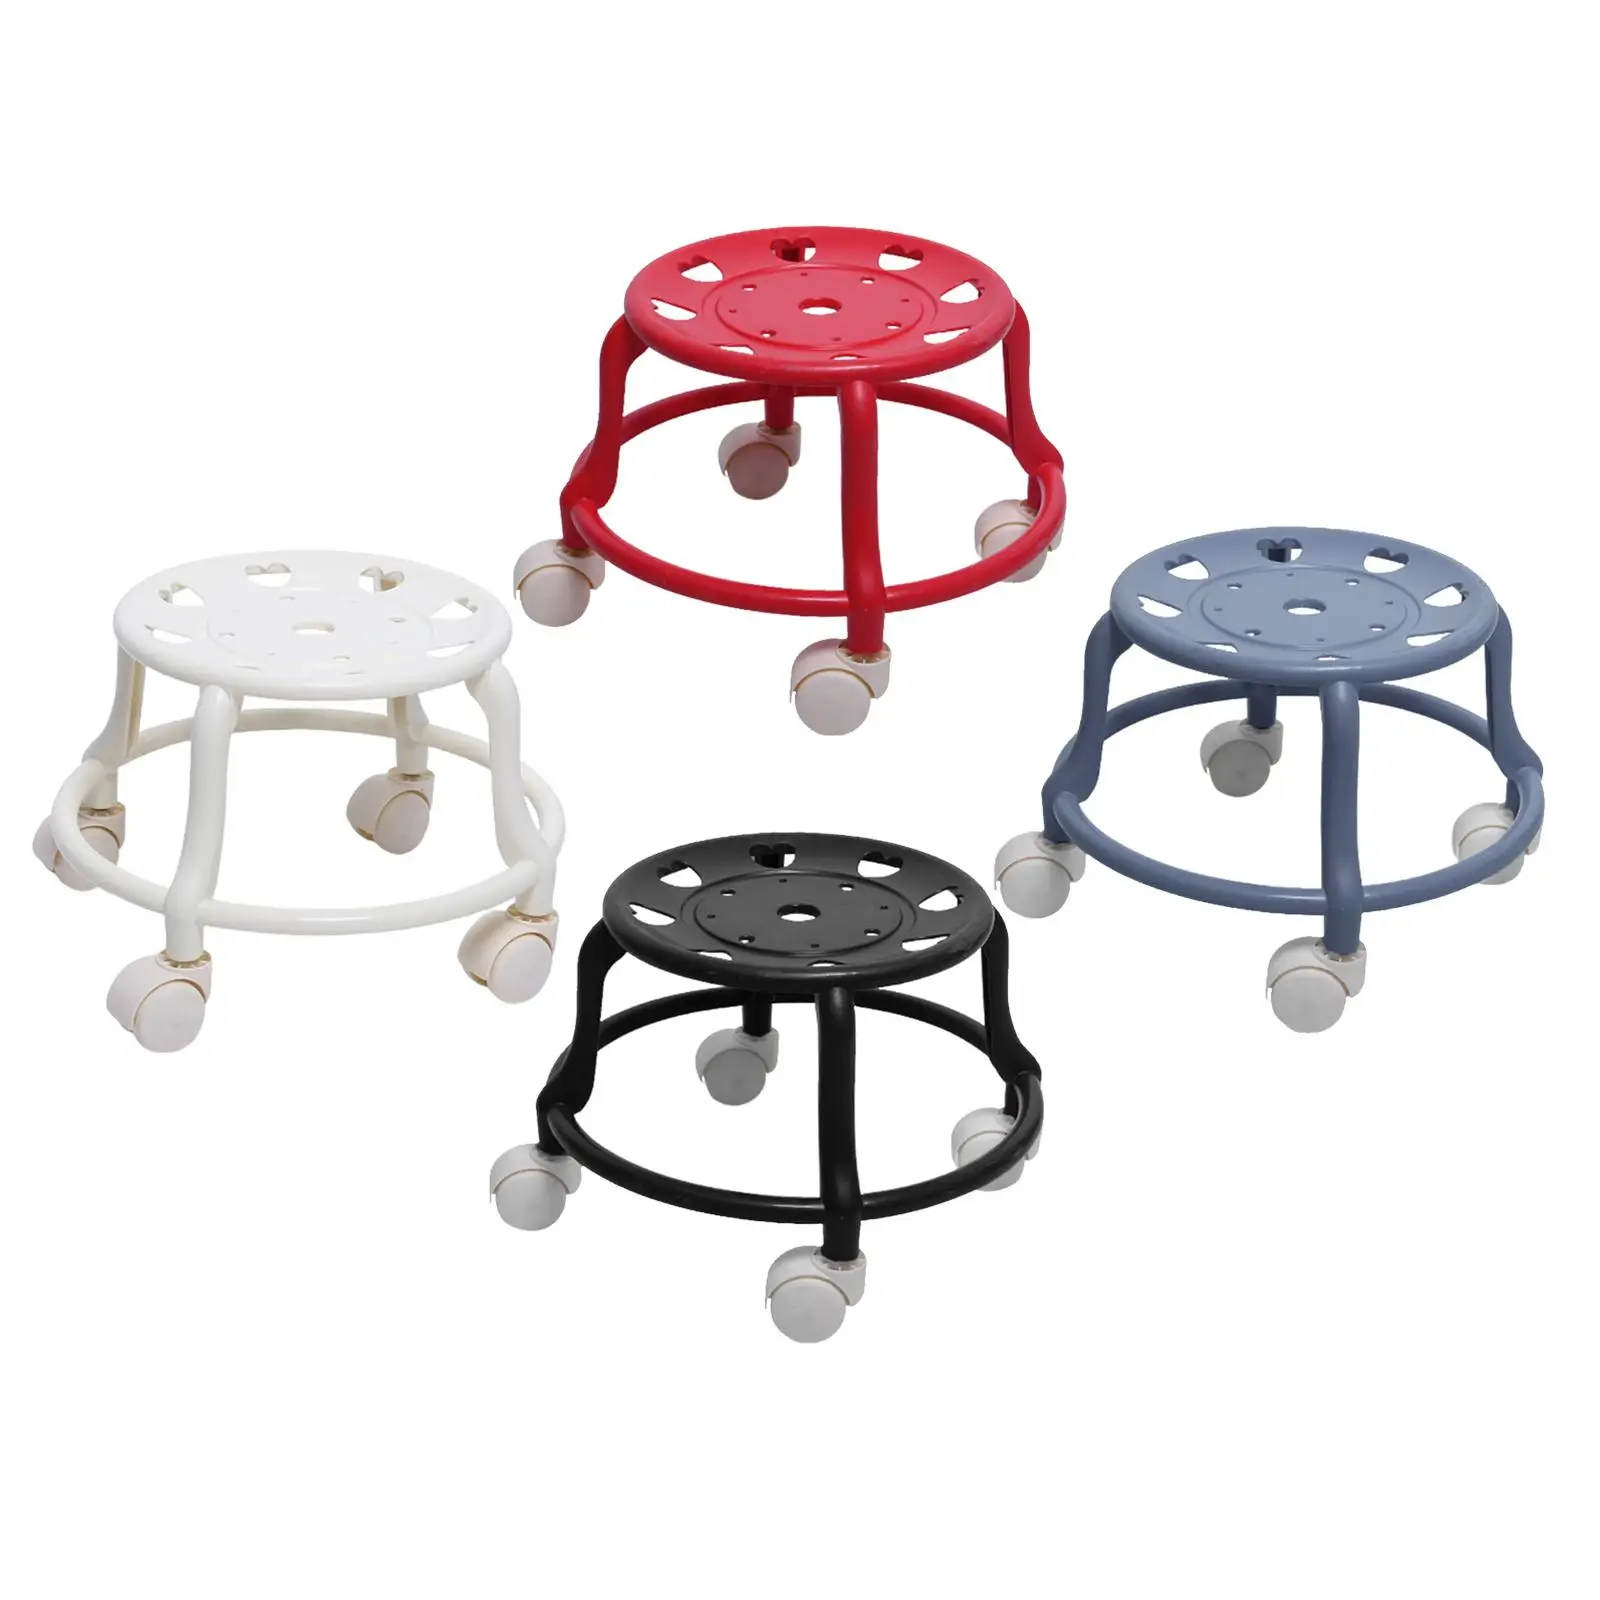 Low Rolling Stool Small Sturdy Lazy Housework Stool Swivel Roller Seat Universal Swivel Casters for Garage Salon Library Fitness